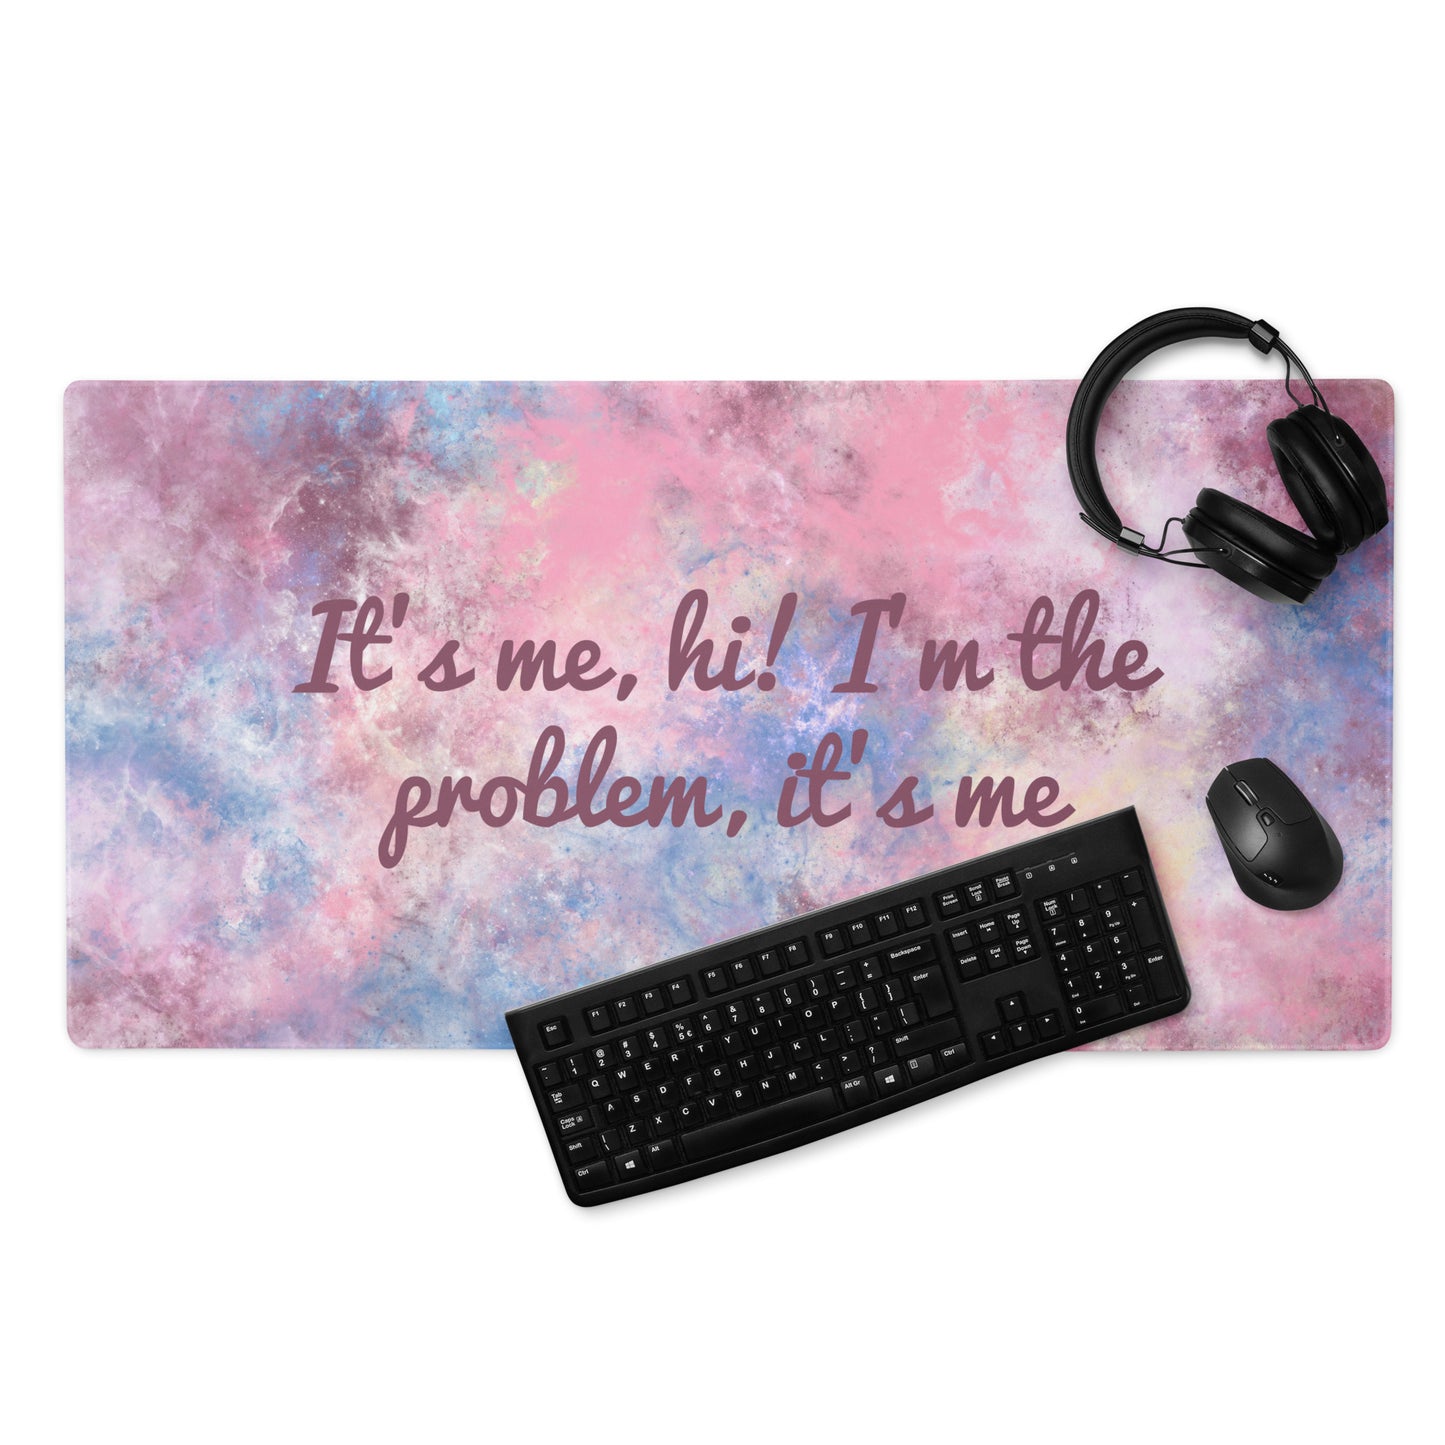 A pink, blue, and white gaming desk pad with the quote It's me, hi! I'm the problem, it's me. A keyboard, headphones, and mouse sit on the desk pad.